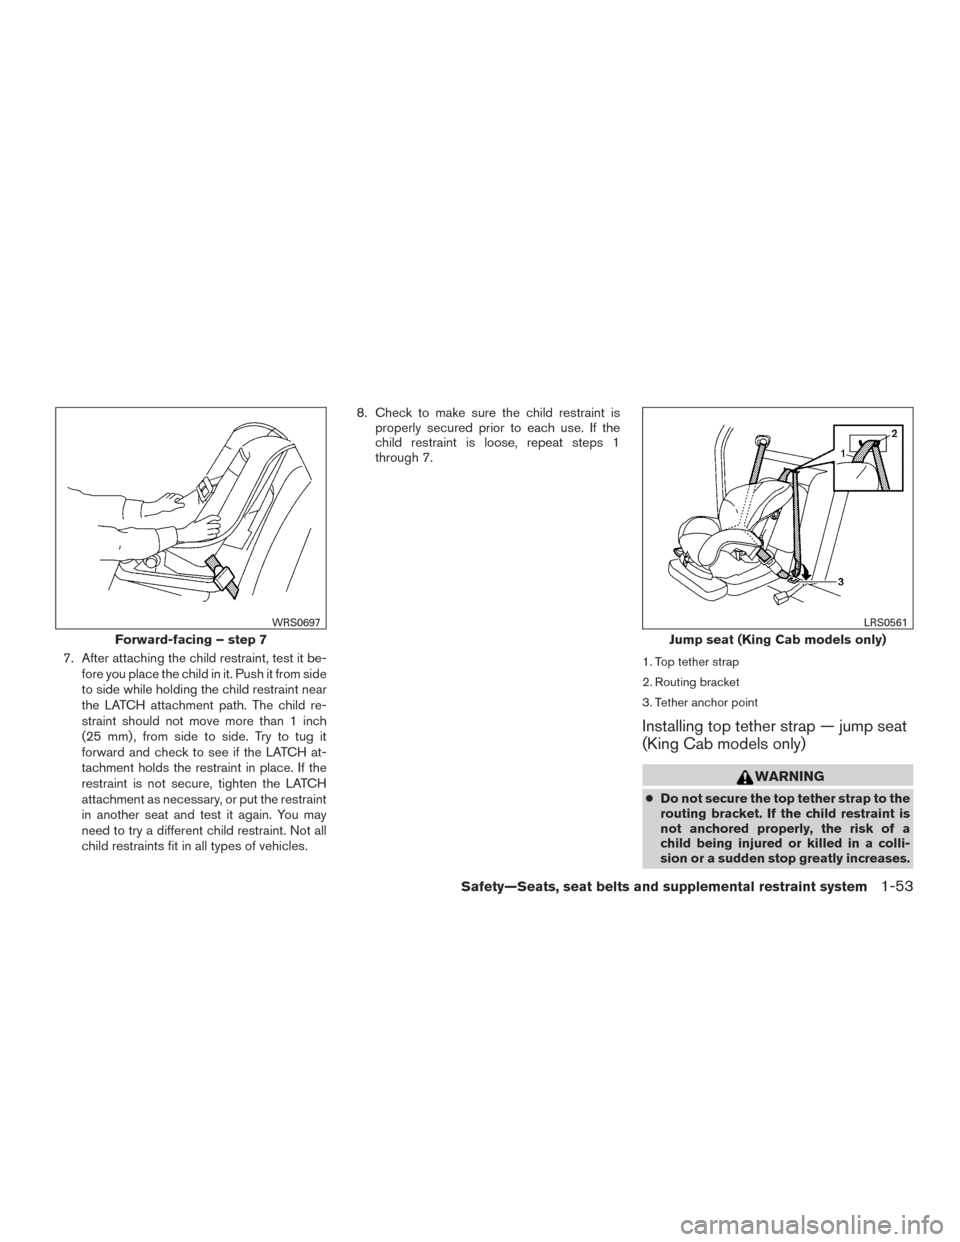 NISSAN FRONTIER 2016 D23 / 3.G Manual PDF 7. After attaching the child restraint, test it be-fore you place the child in it. Push it from side
to side while holding the child restraint near
the LATCH attachment path. The child re-
straint sho